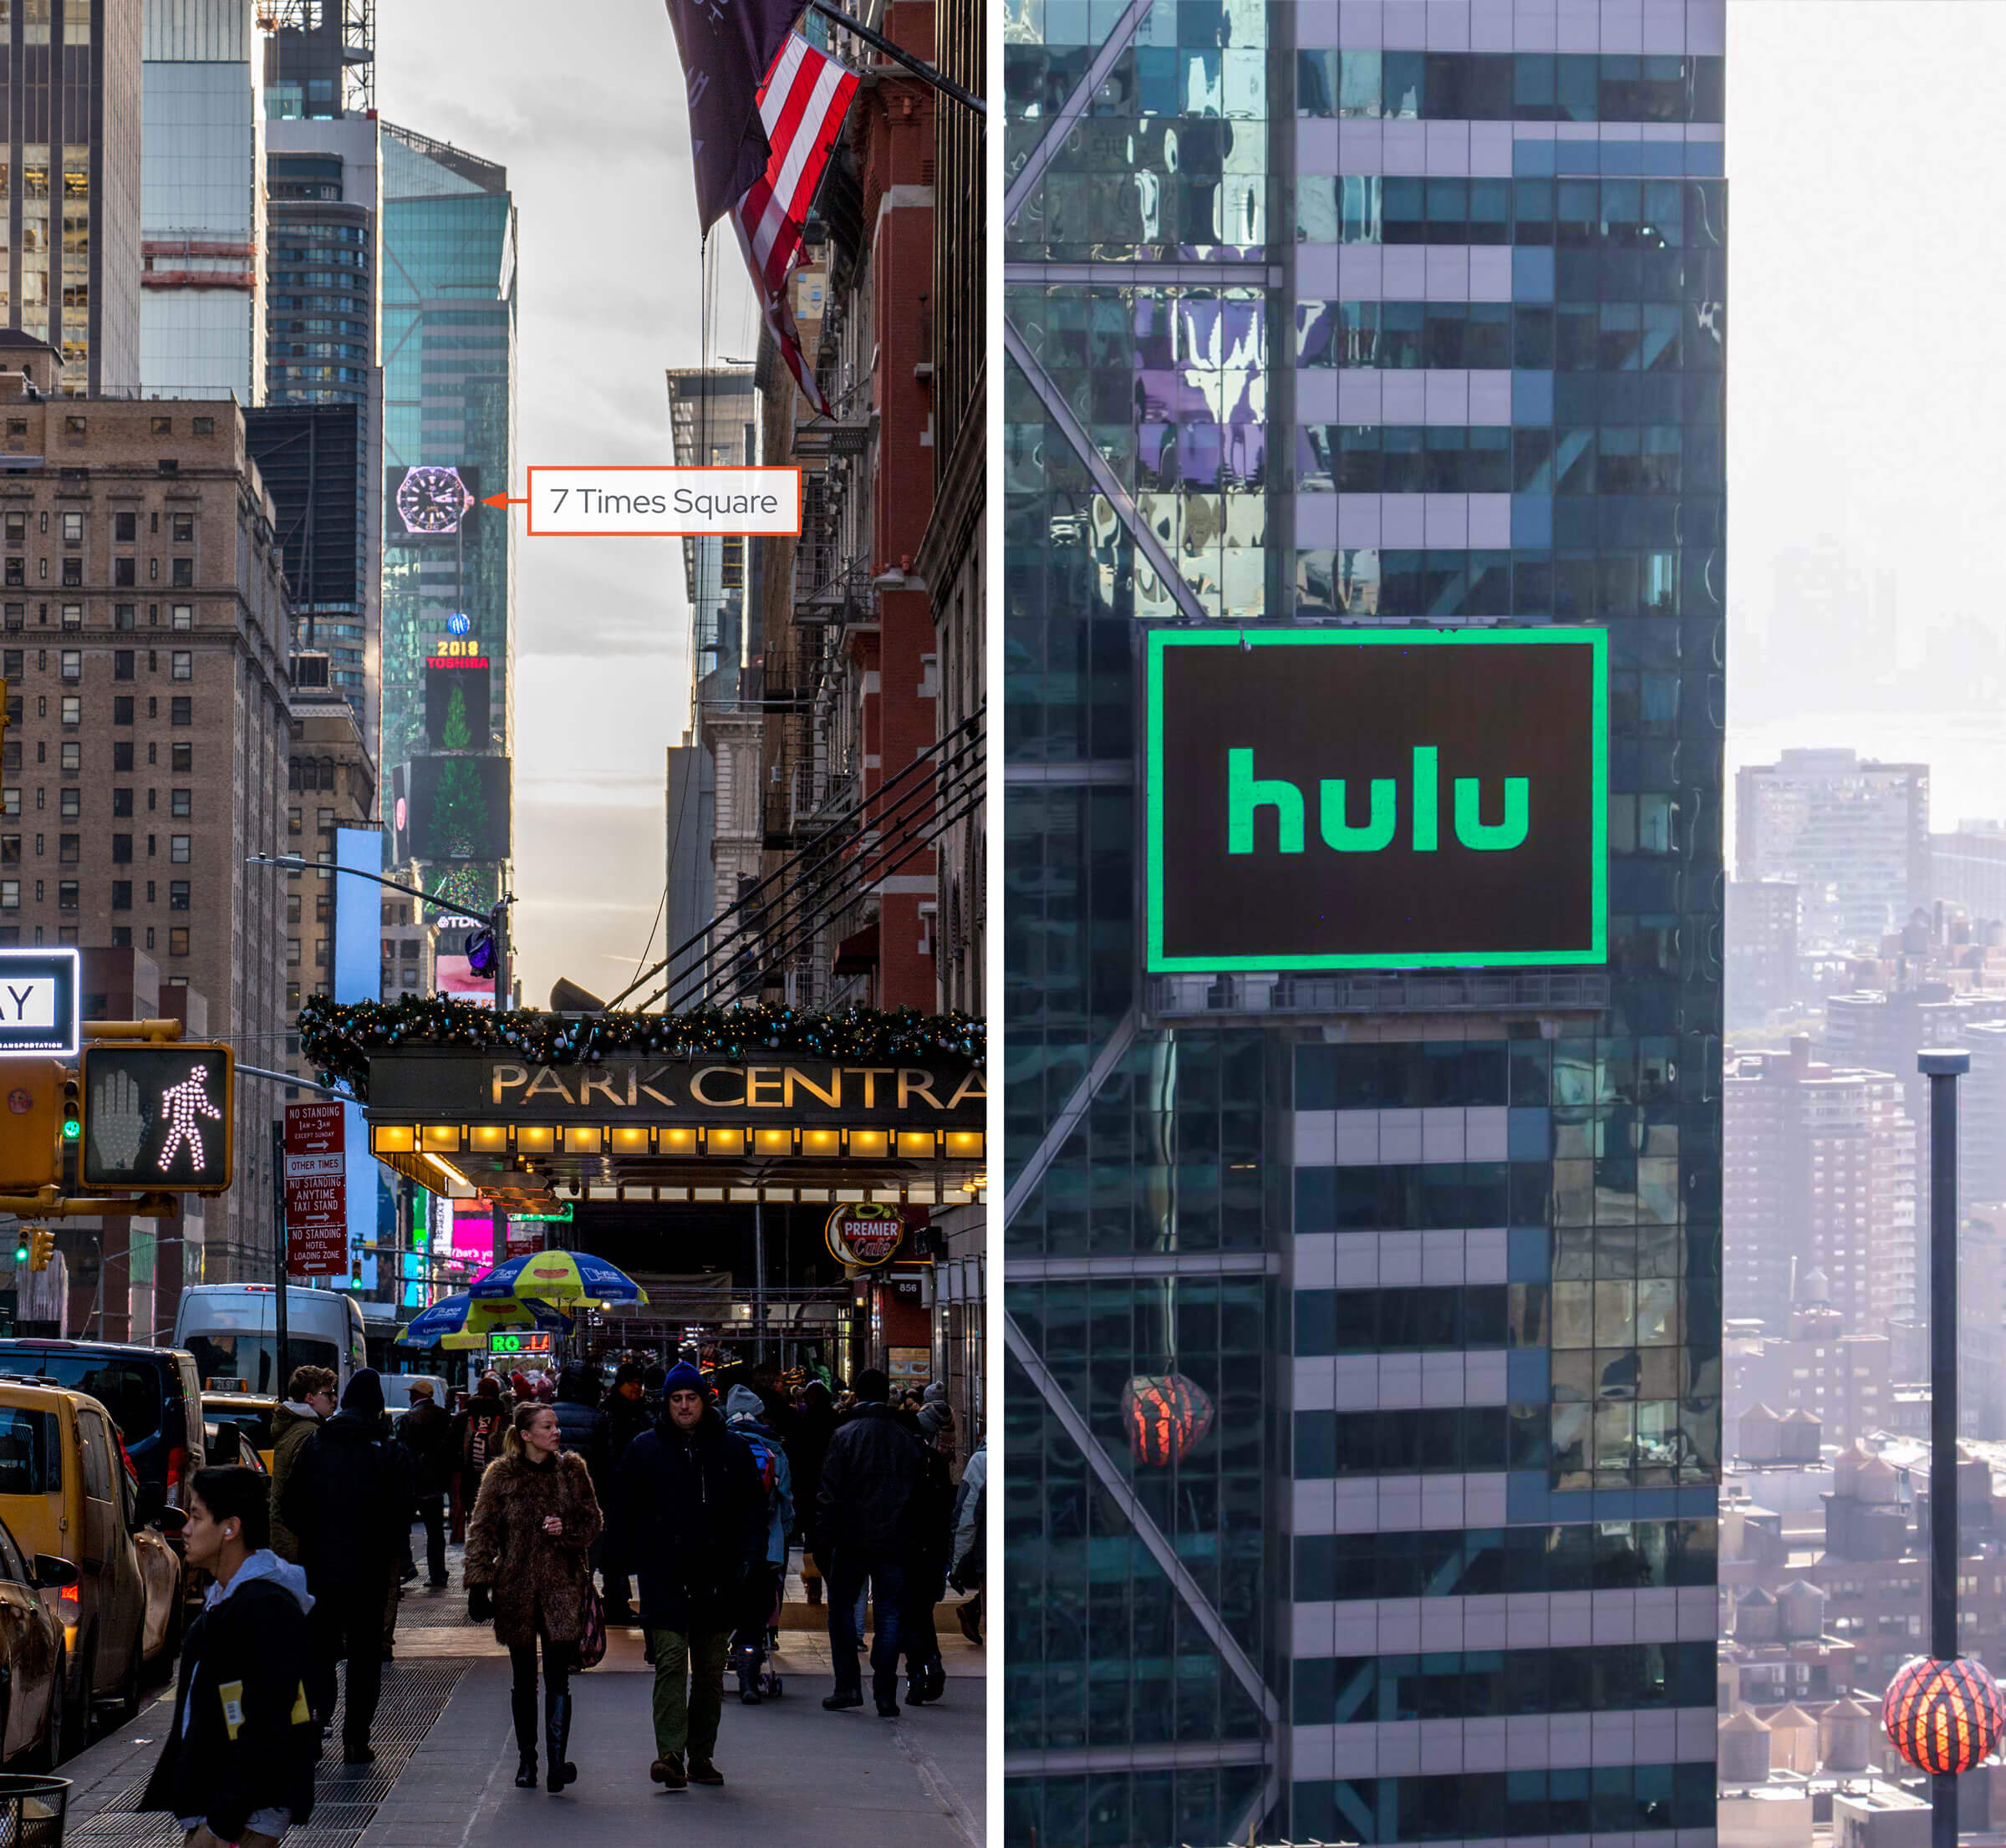 Two views of the screen atop 7 Times Square